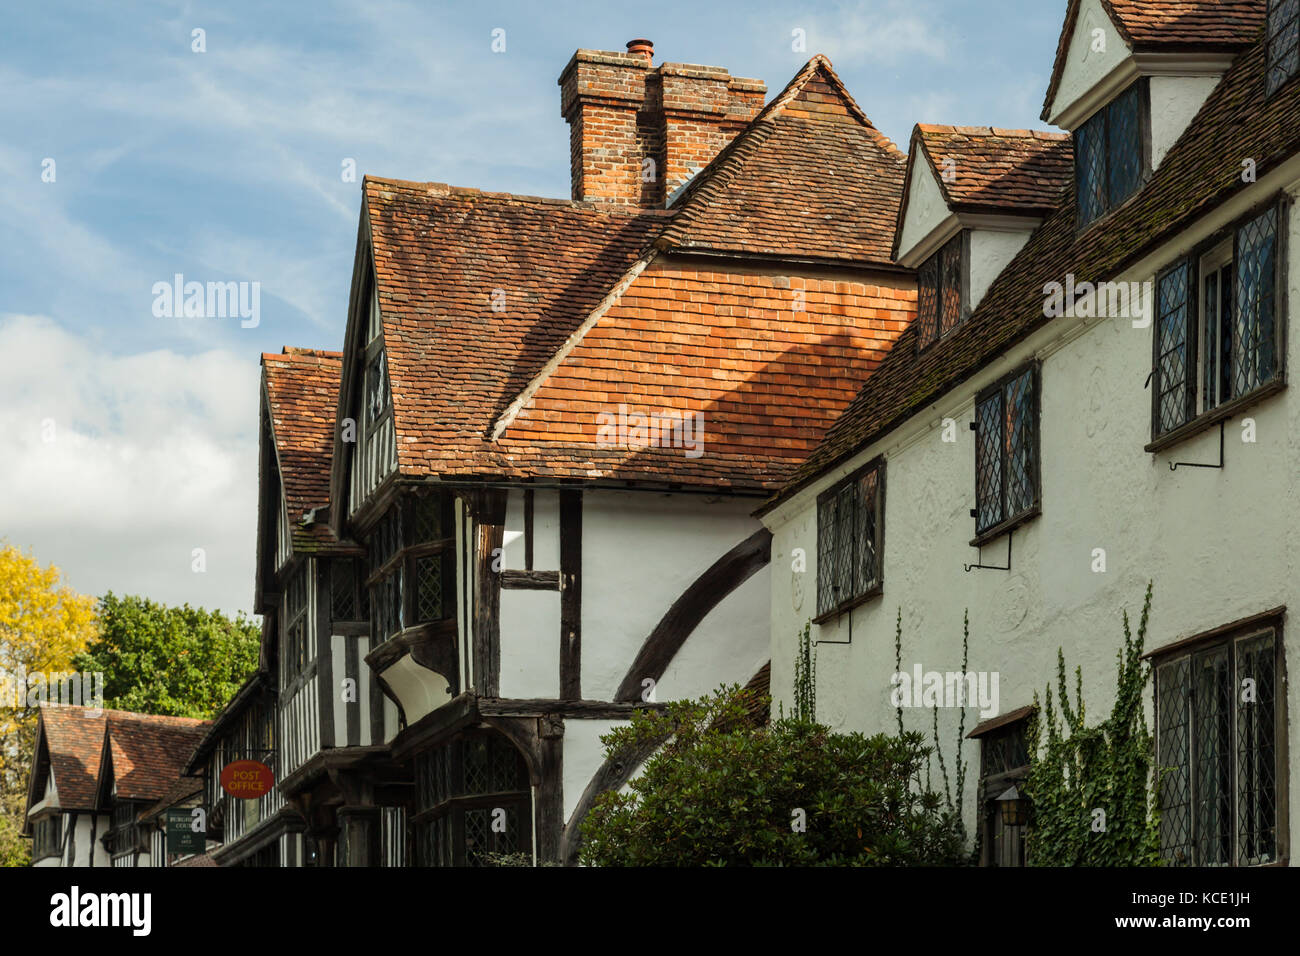 Autumn afternoon in the Tudor village of Chiddingstone, Kent, England. Stock Photo